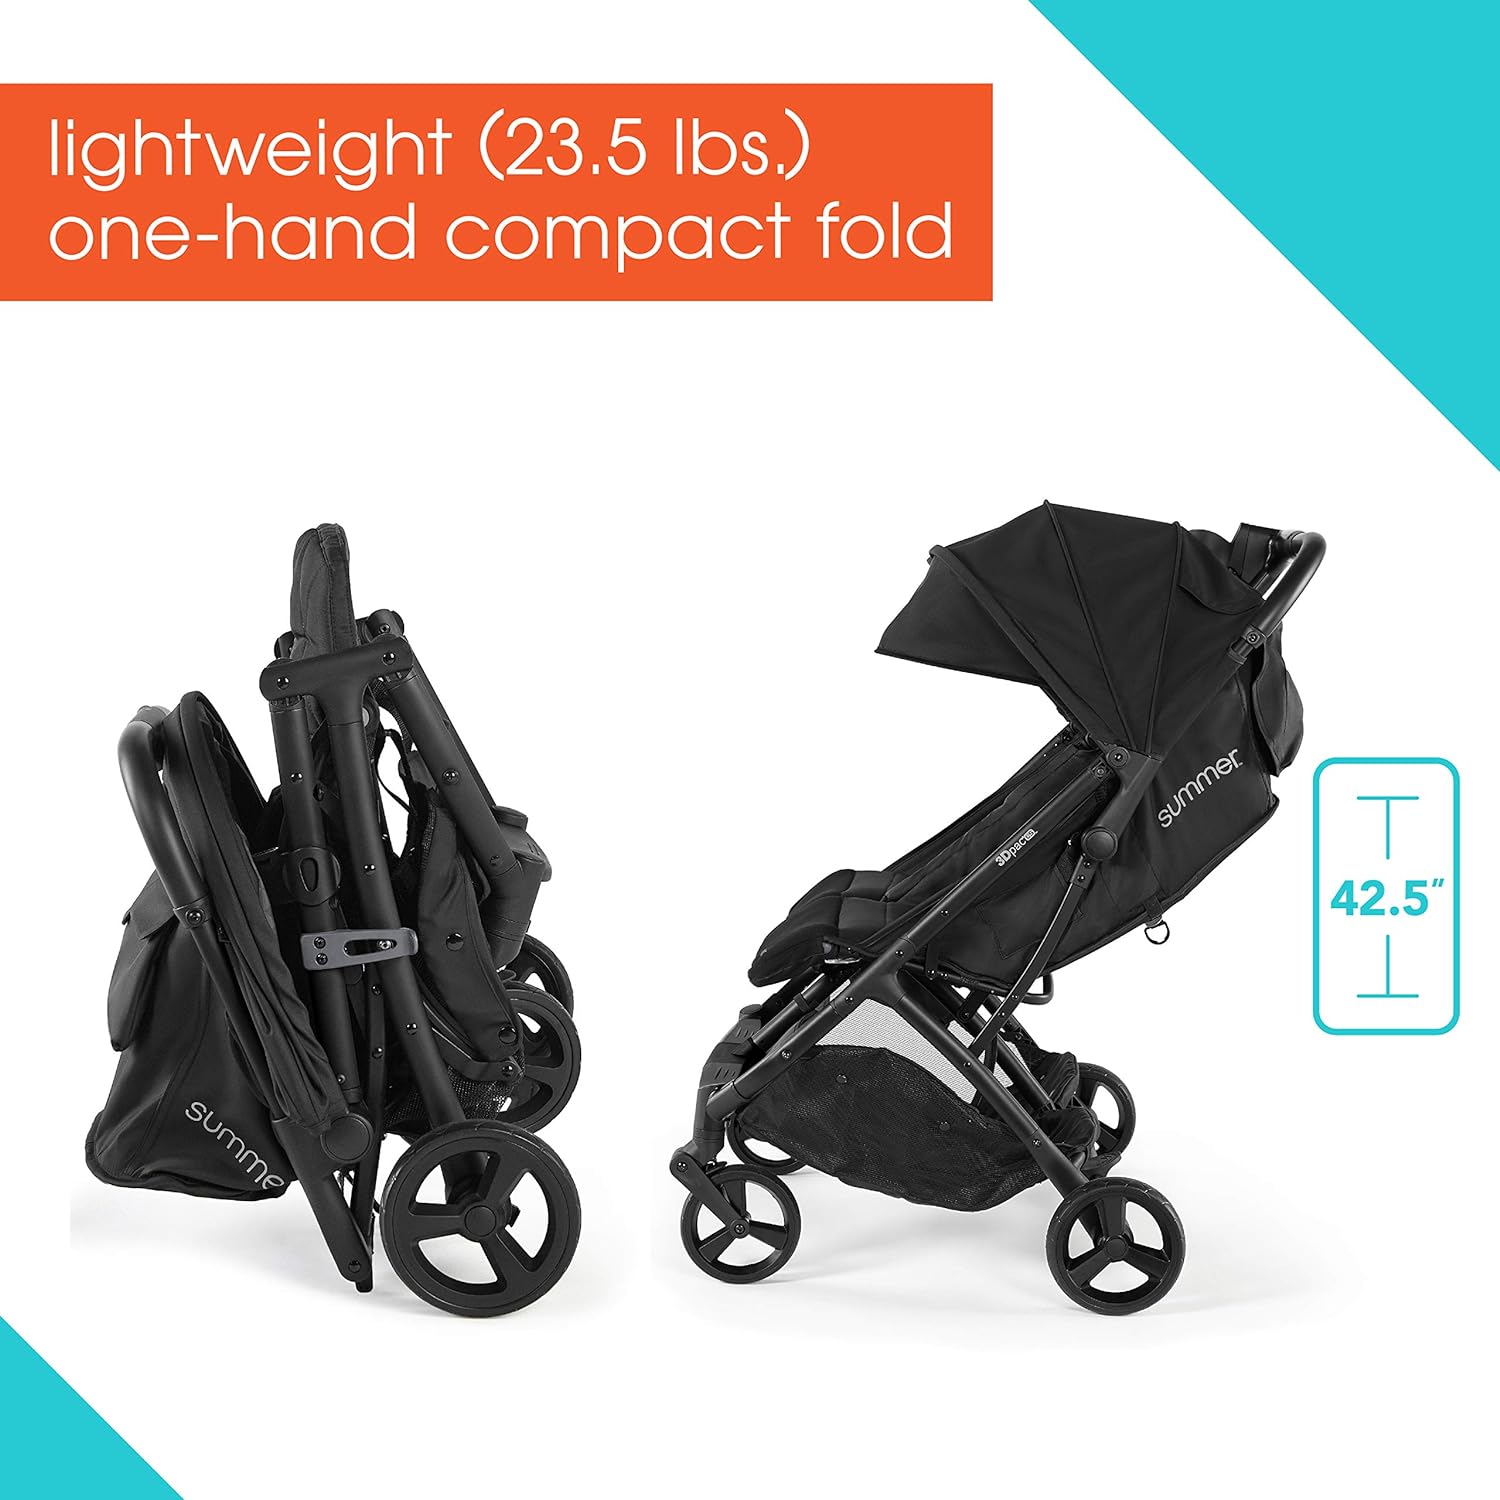 Summer Infant 3Dpac CS+ Double Stroller, Black – Car Seat Compatible Lightweight Baby Stroller with Convenient One-Hand Fold, Reclining Seats, Two Extra-Large Canopies  Parent Friendly Features - Summer Infant 3Dpac CS+ Double Stroller Review